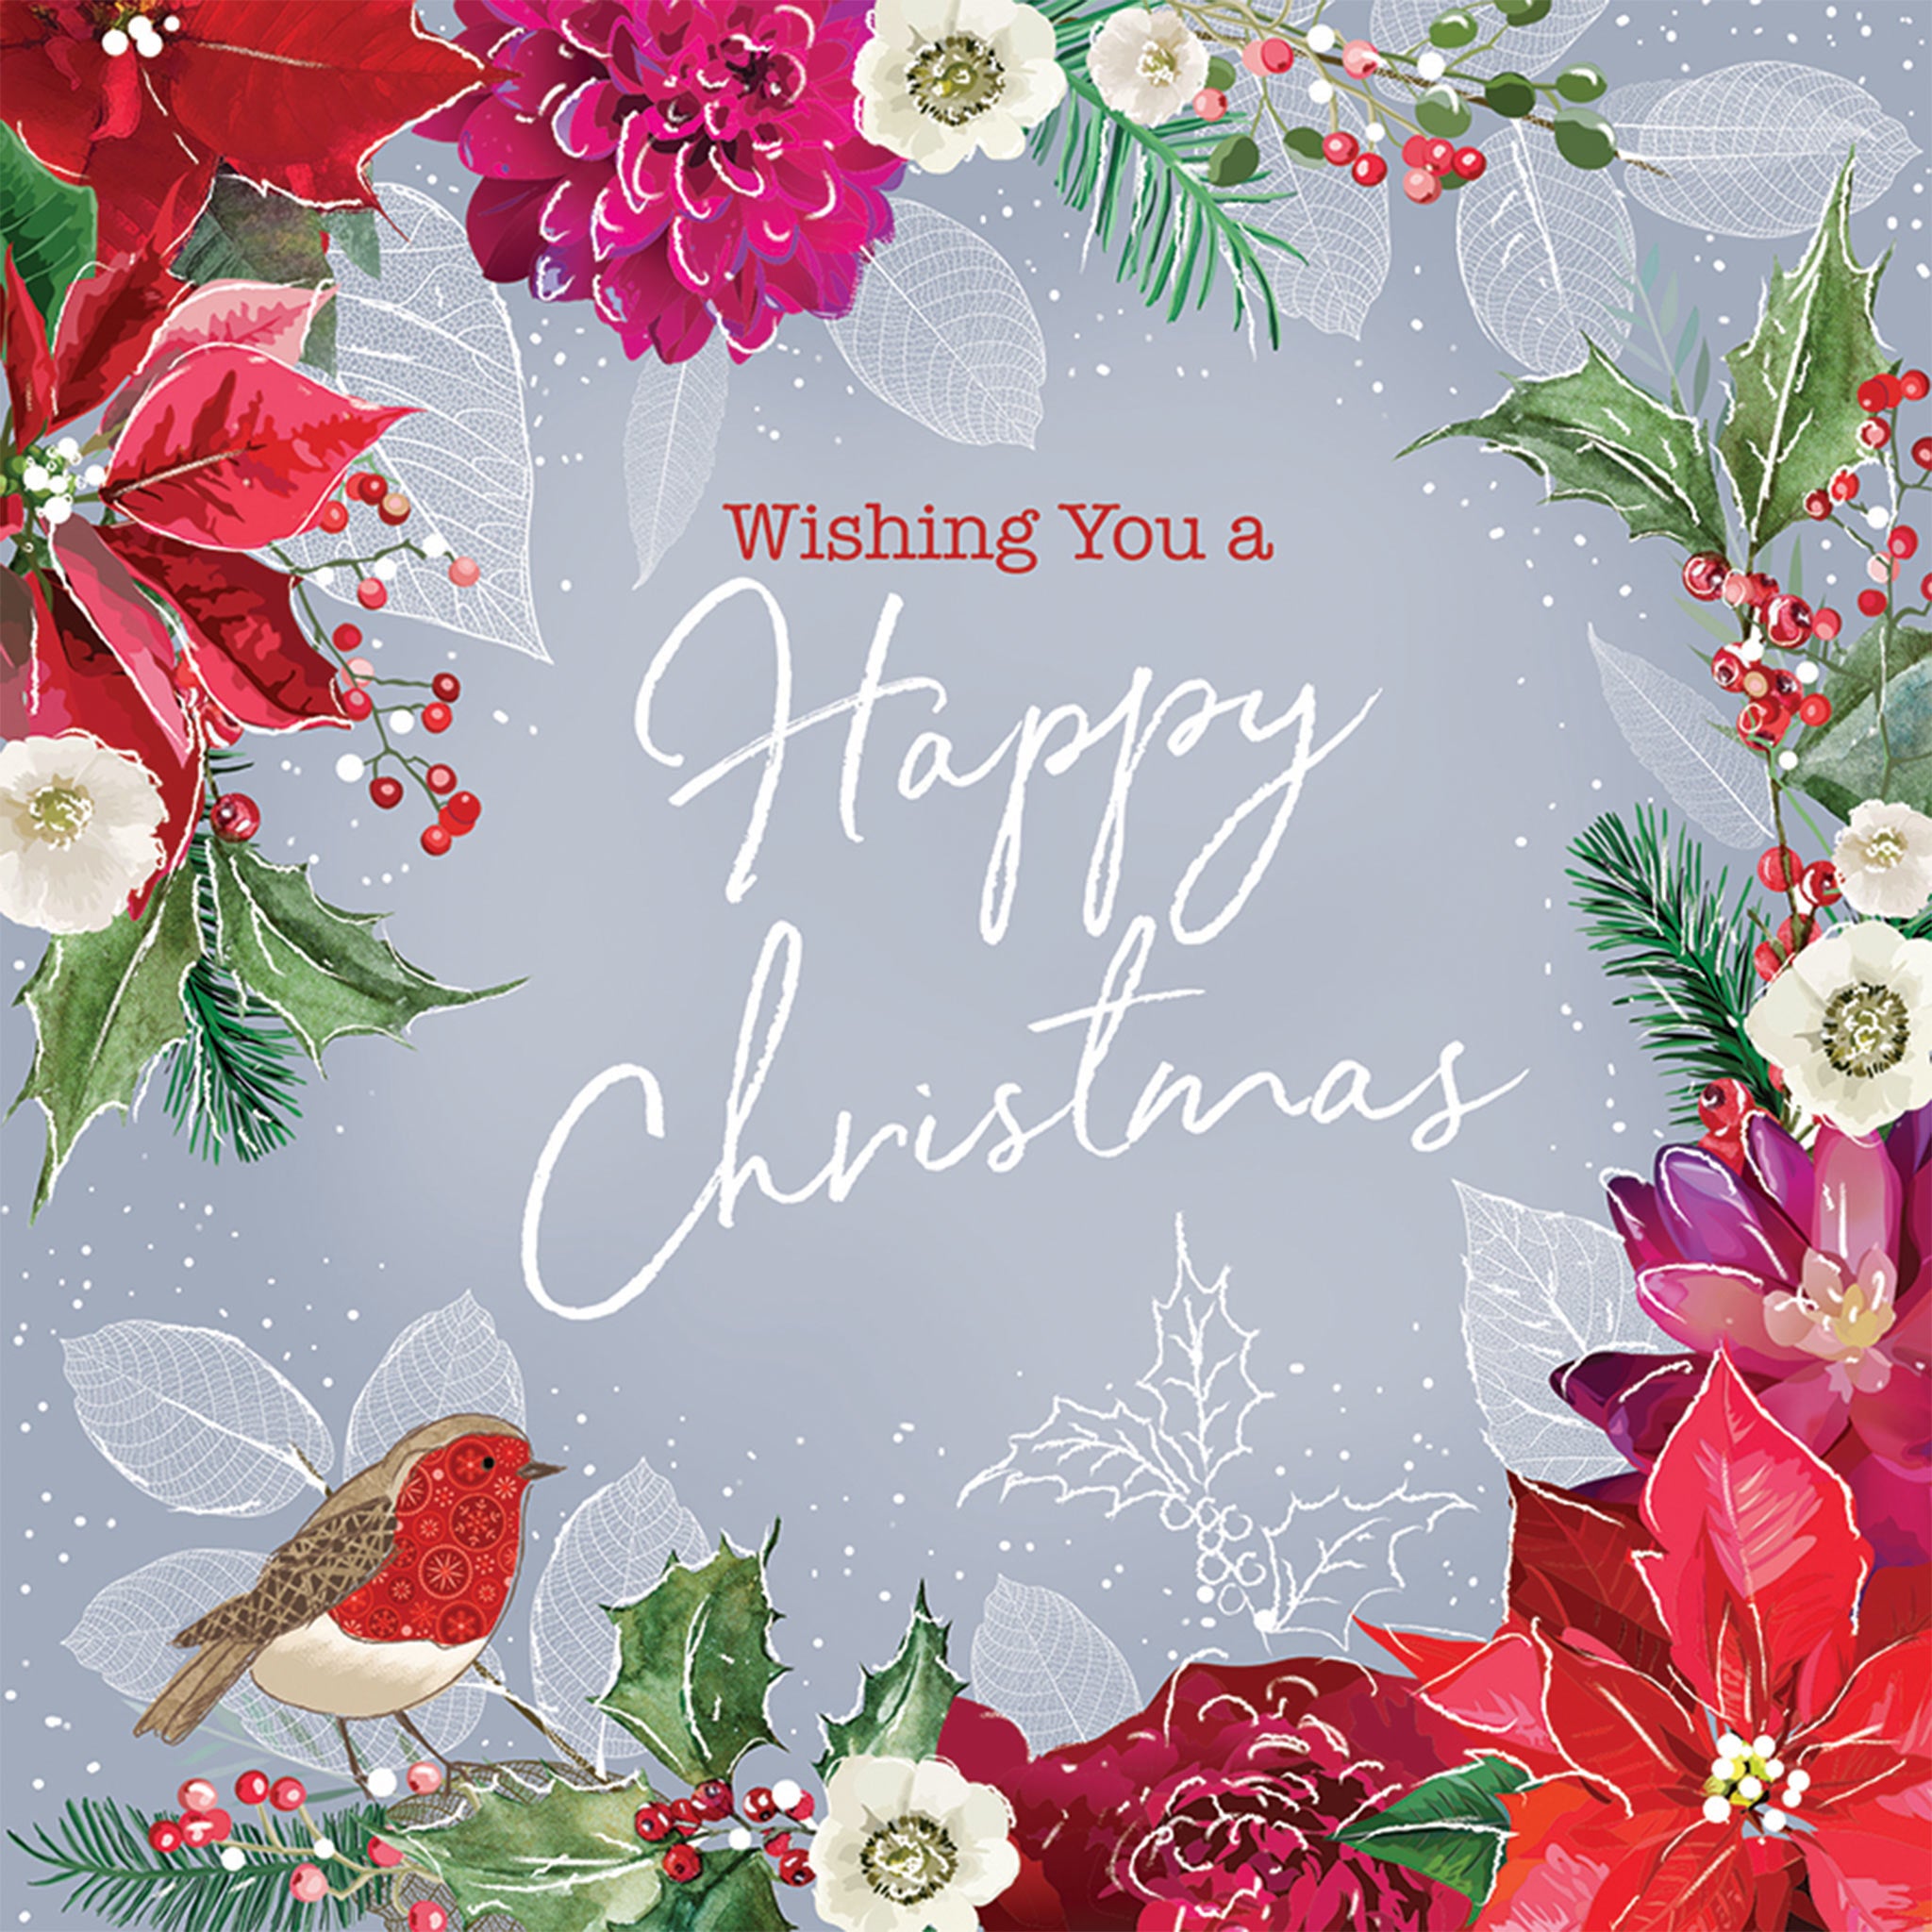 The design on this Christmas card is the message "Wishing You a Happy Christmas" surrounded by a border of winter flowers.